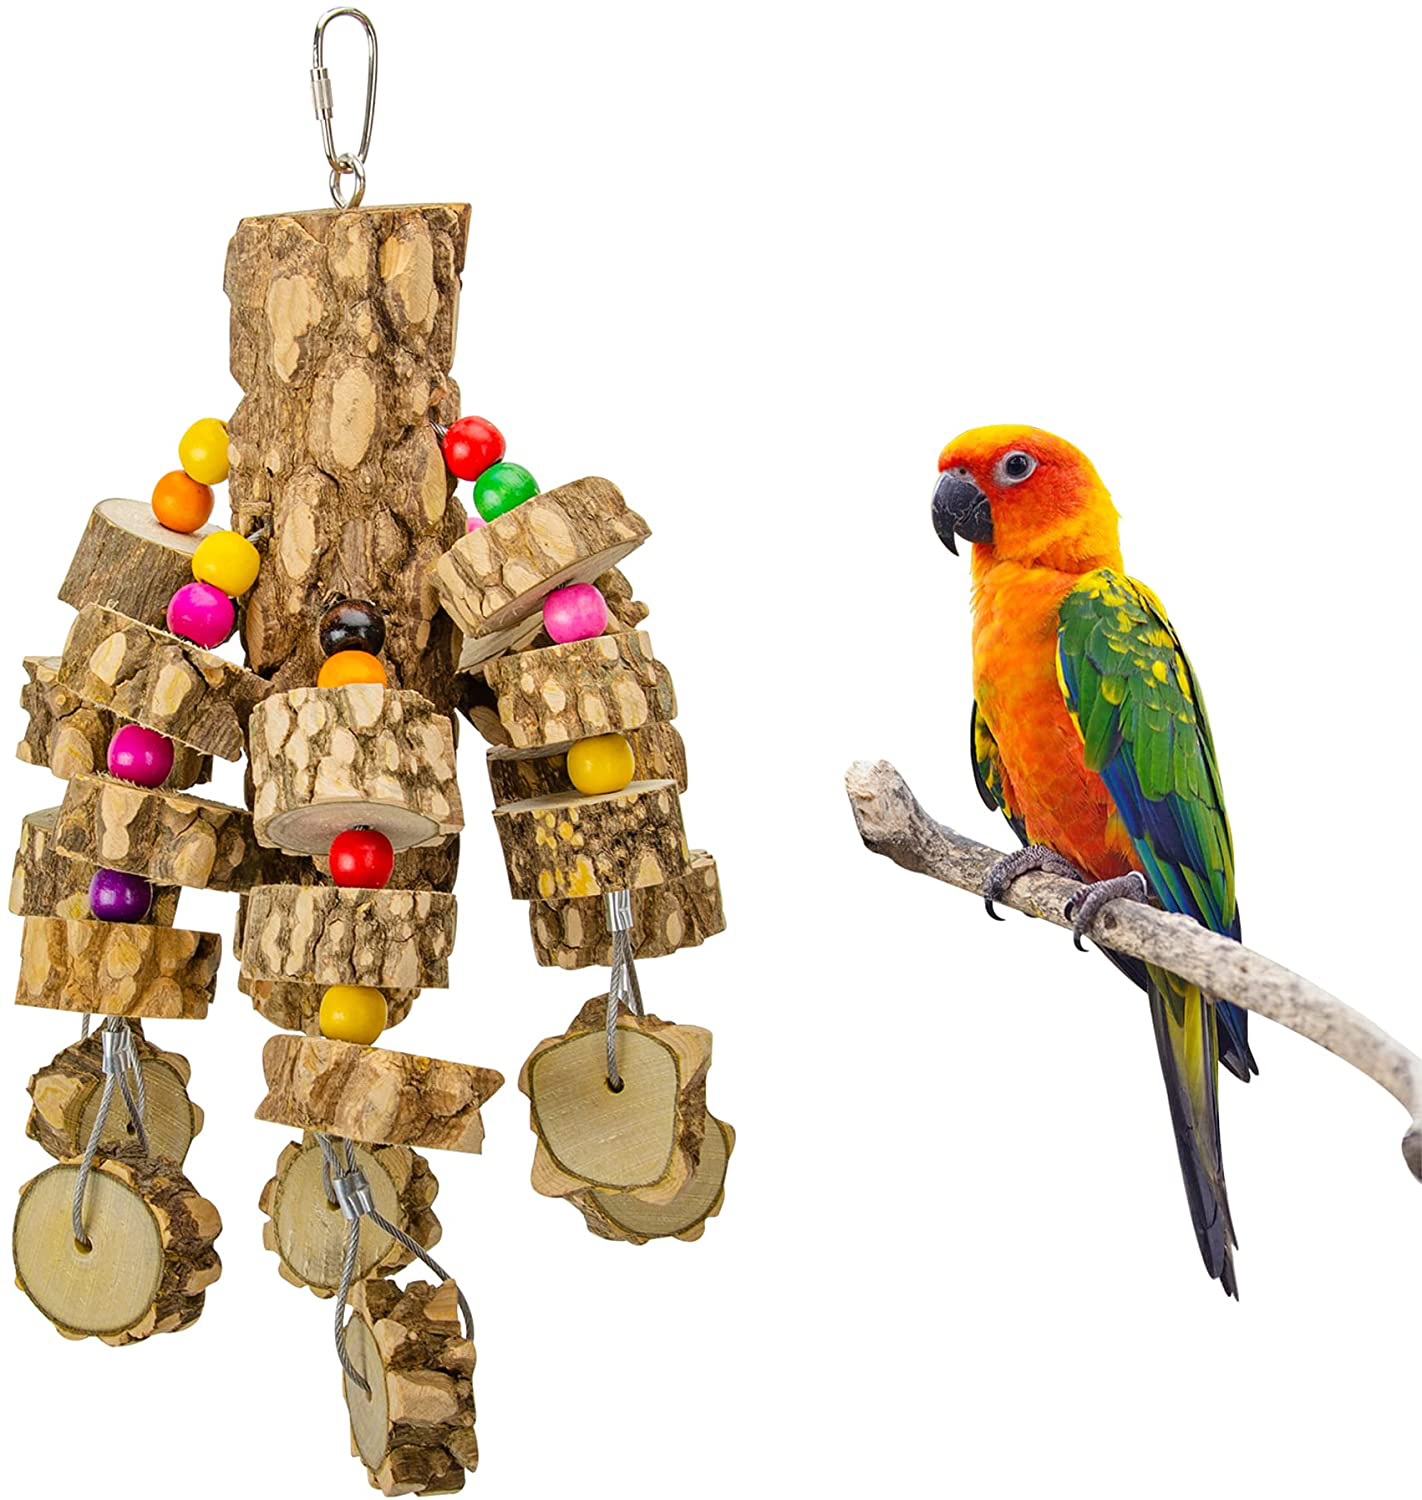 MYFAMIREA Parrot Toys for Medium Birds, Parrot Chewing Toy Bird Cage Chewing Toy for African Greys, Cockatoos, Macaws, Small Medium and Large Birds